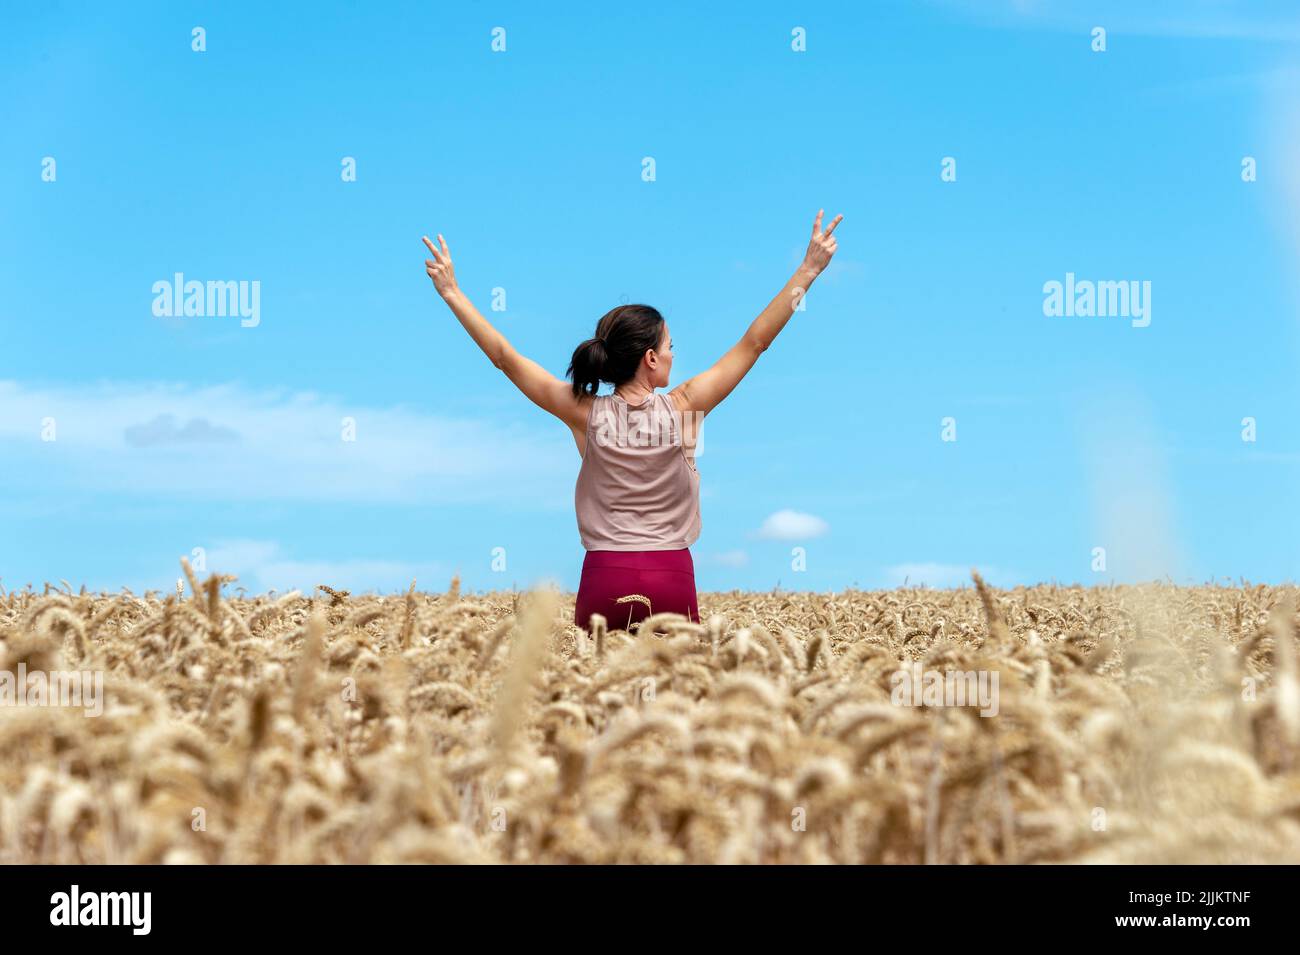 Happy woman feeling free with her arms outstretched, standing in a field of golden wheat Stock Photo